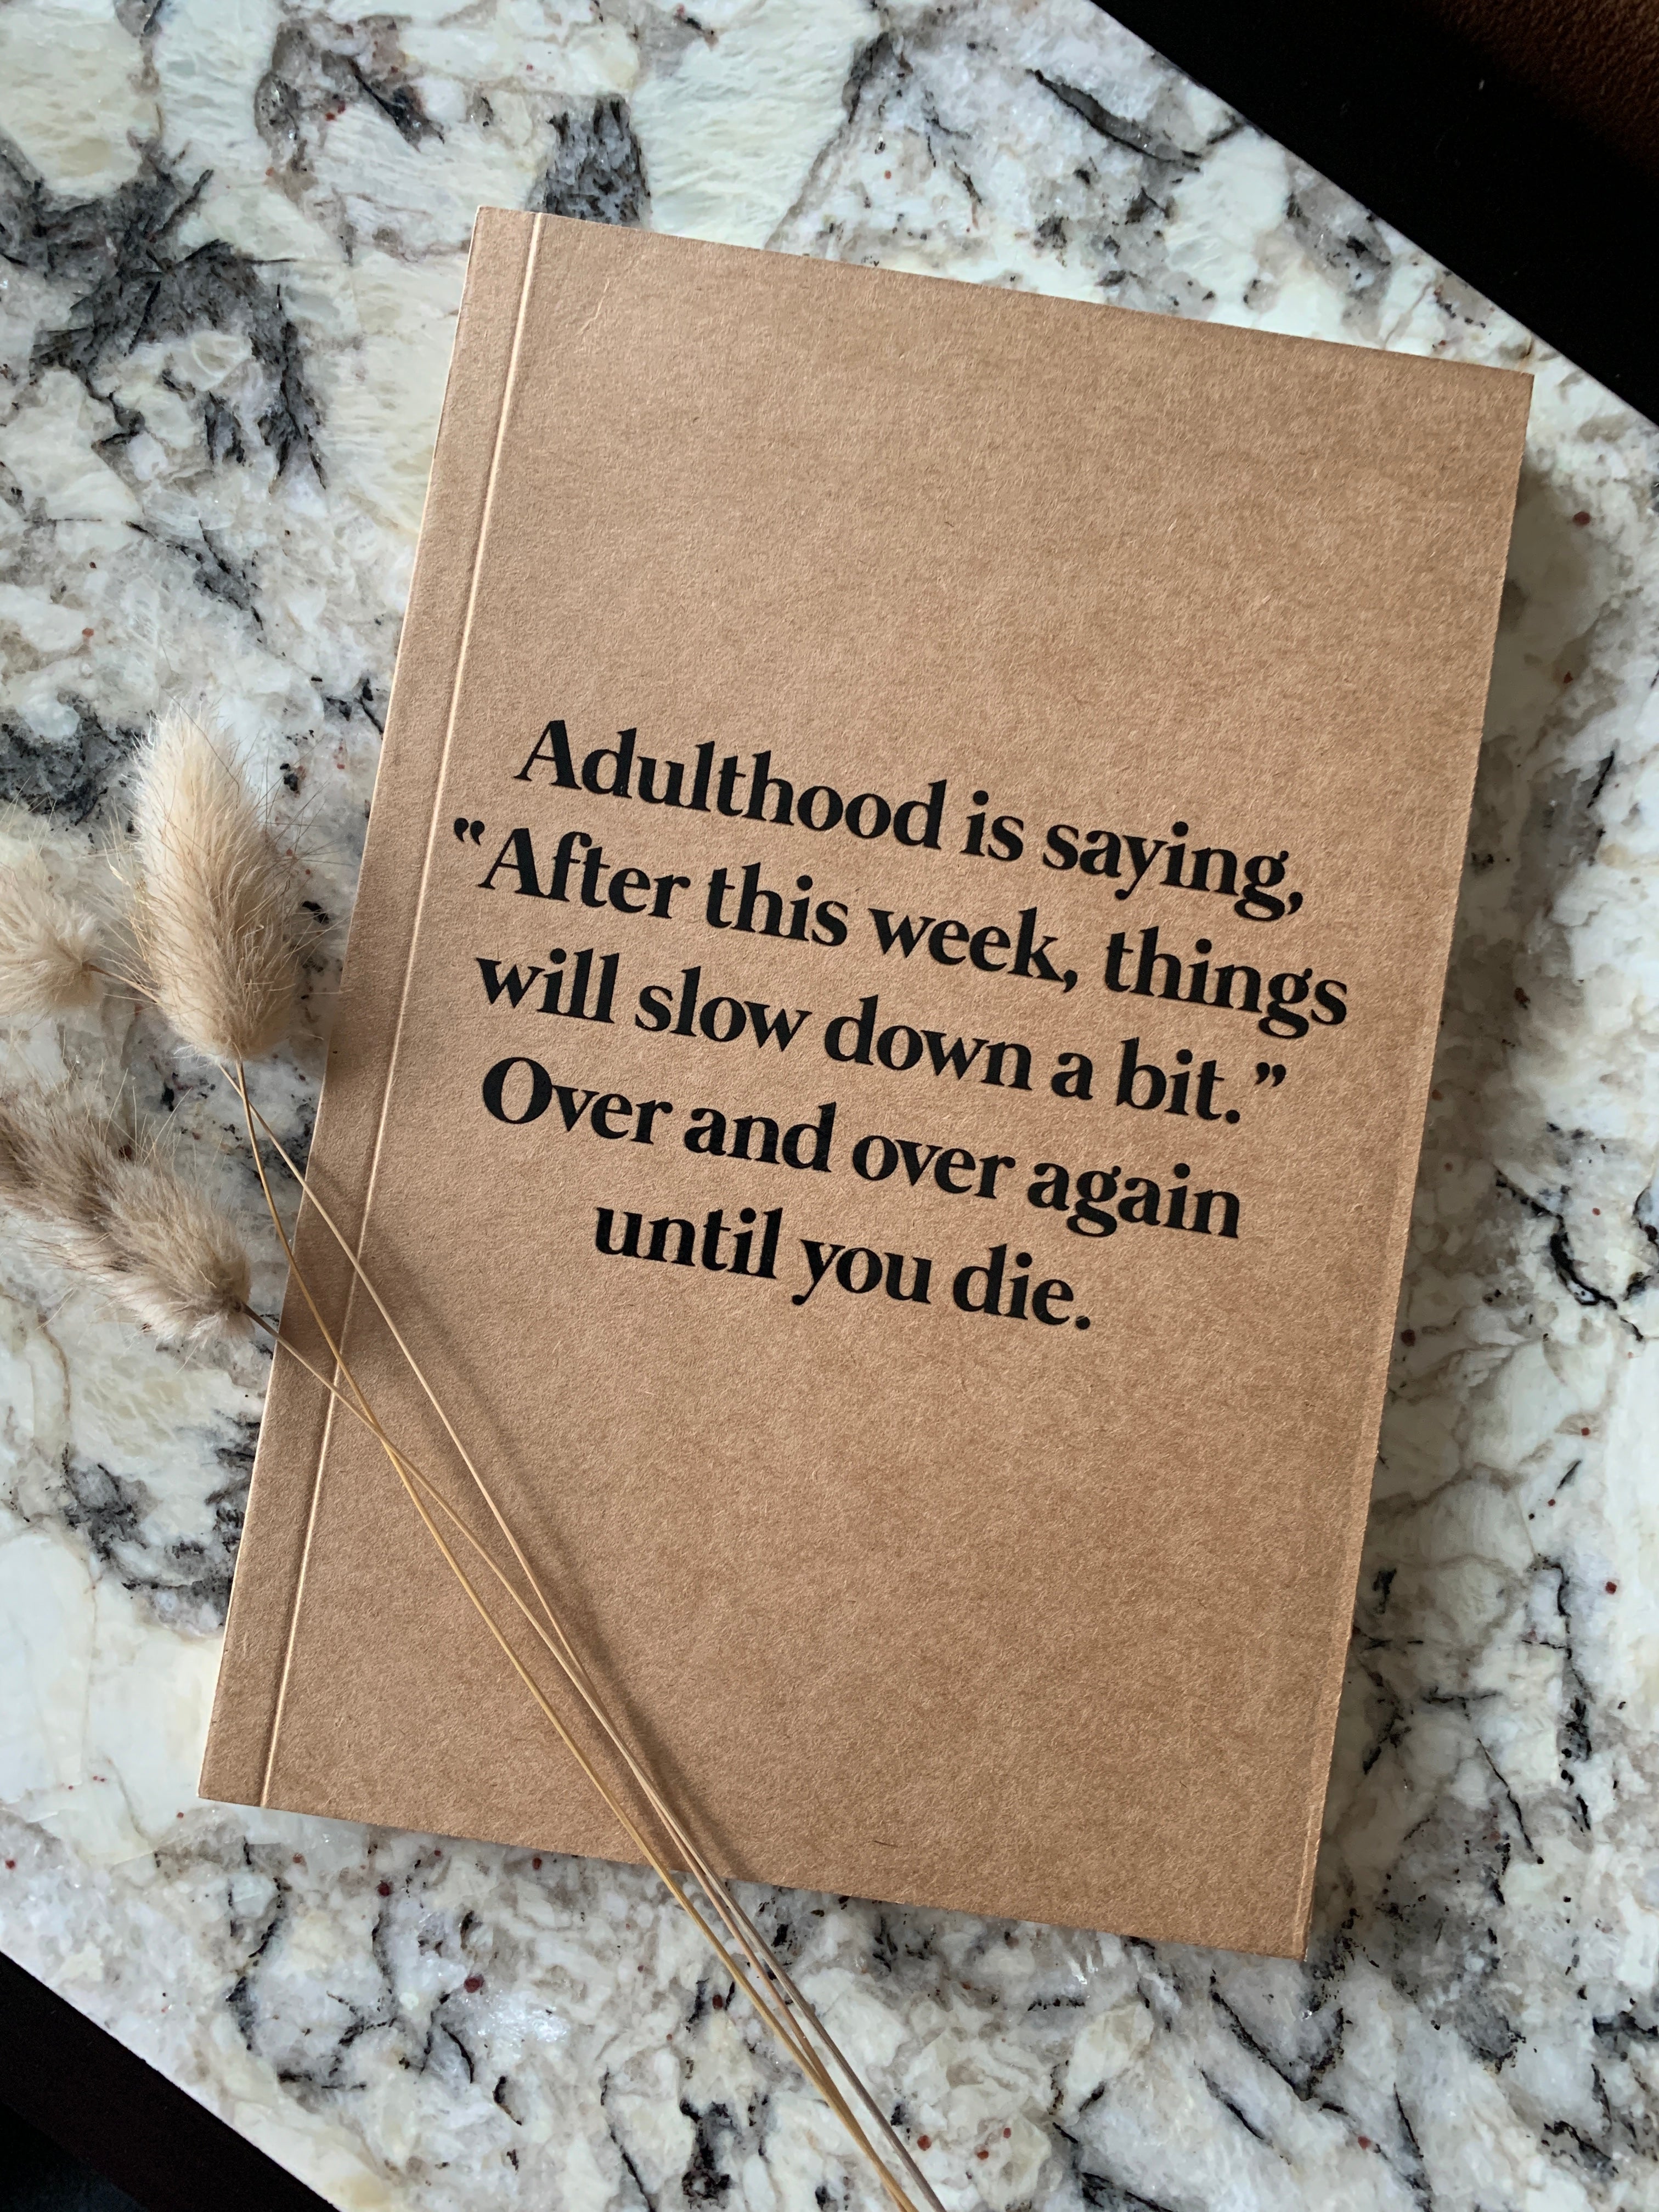 Adulthood is saying, "After this week, things will slow down a bit." Over and over again until you die kraft notebook